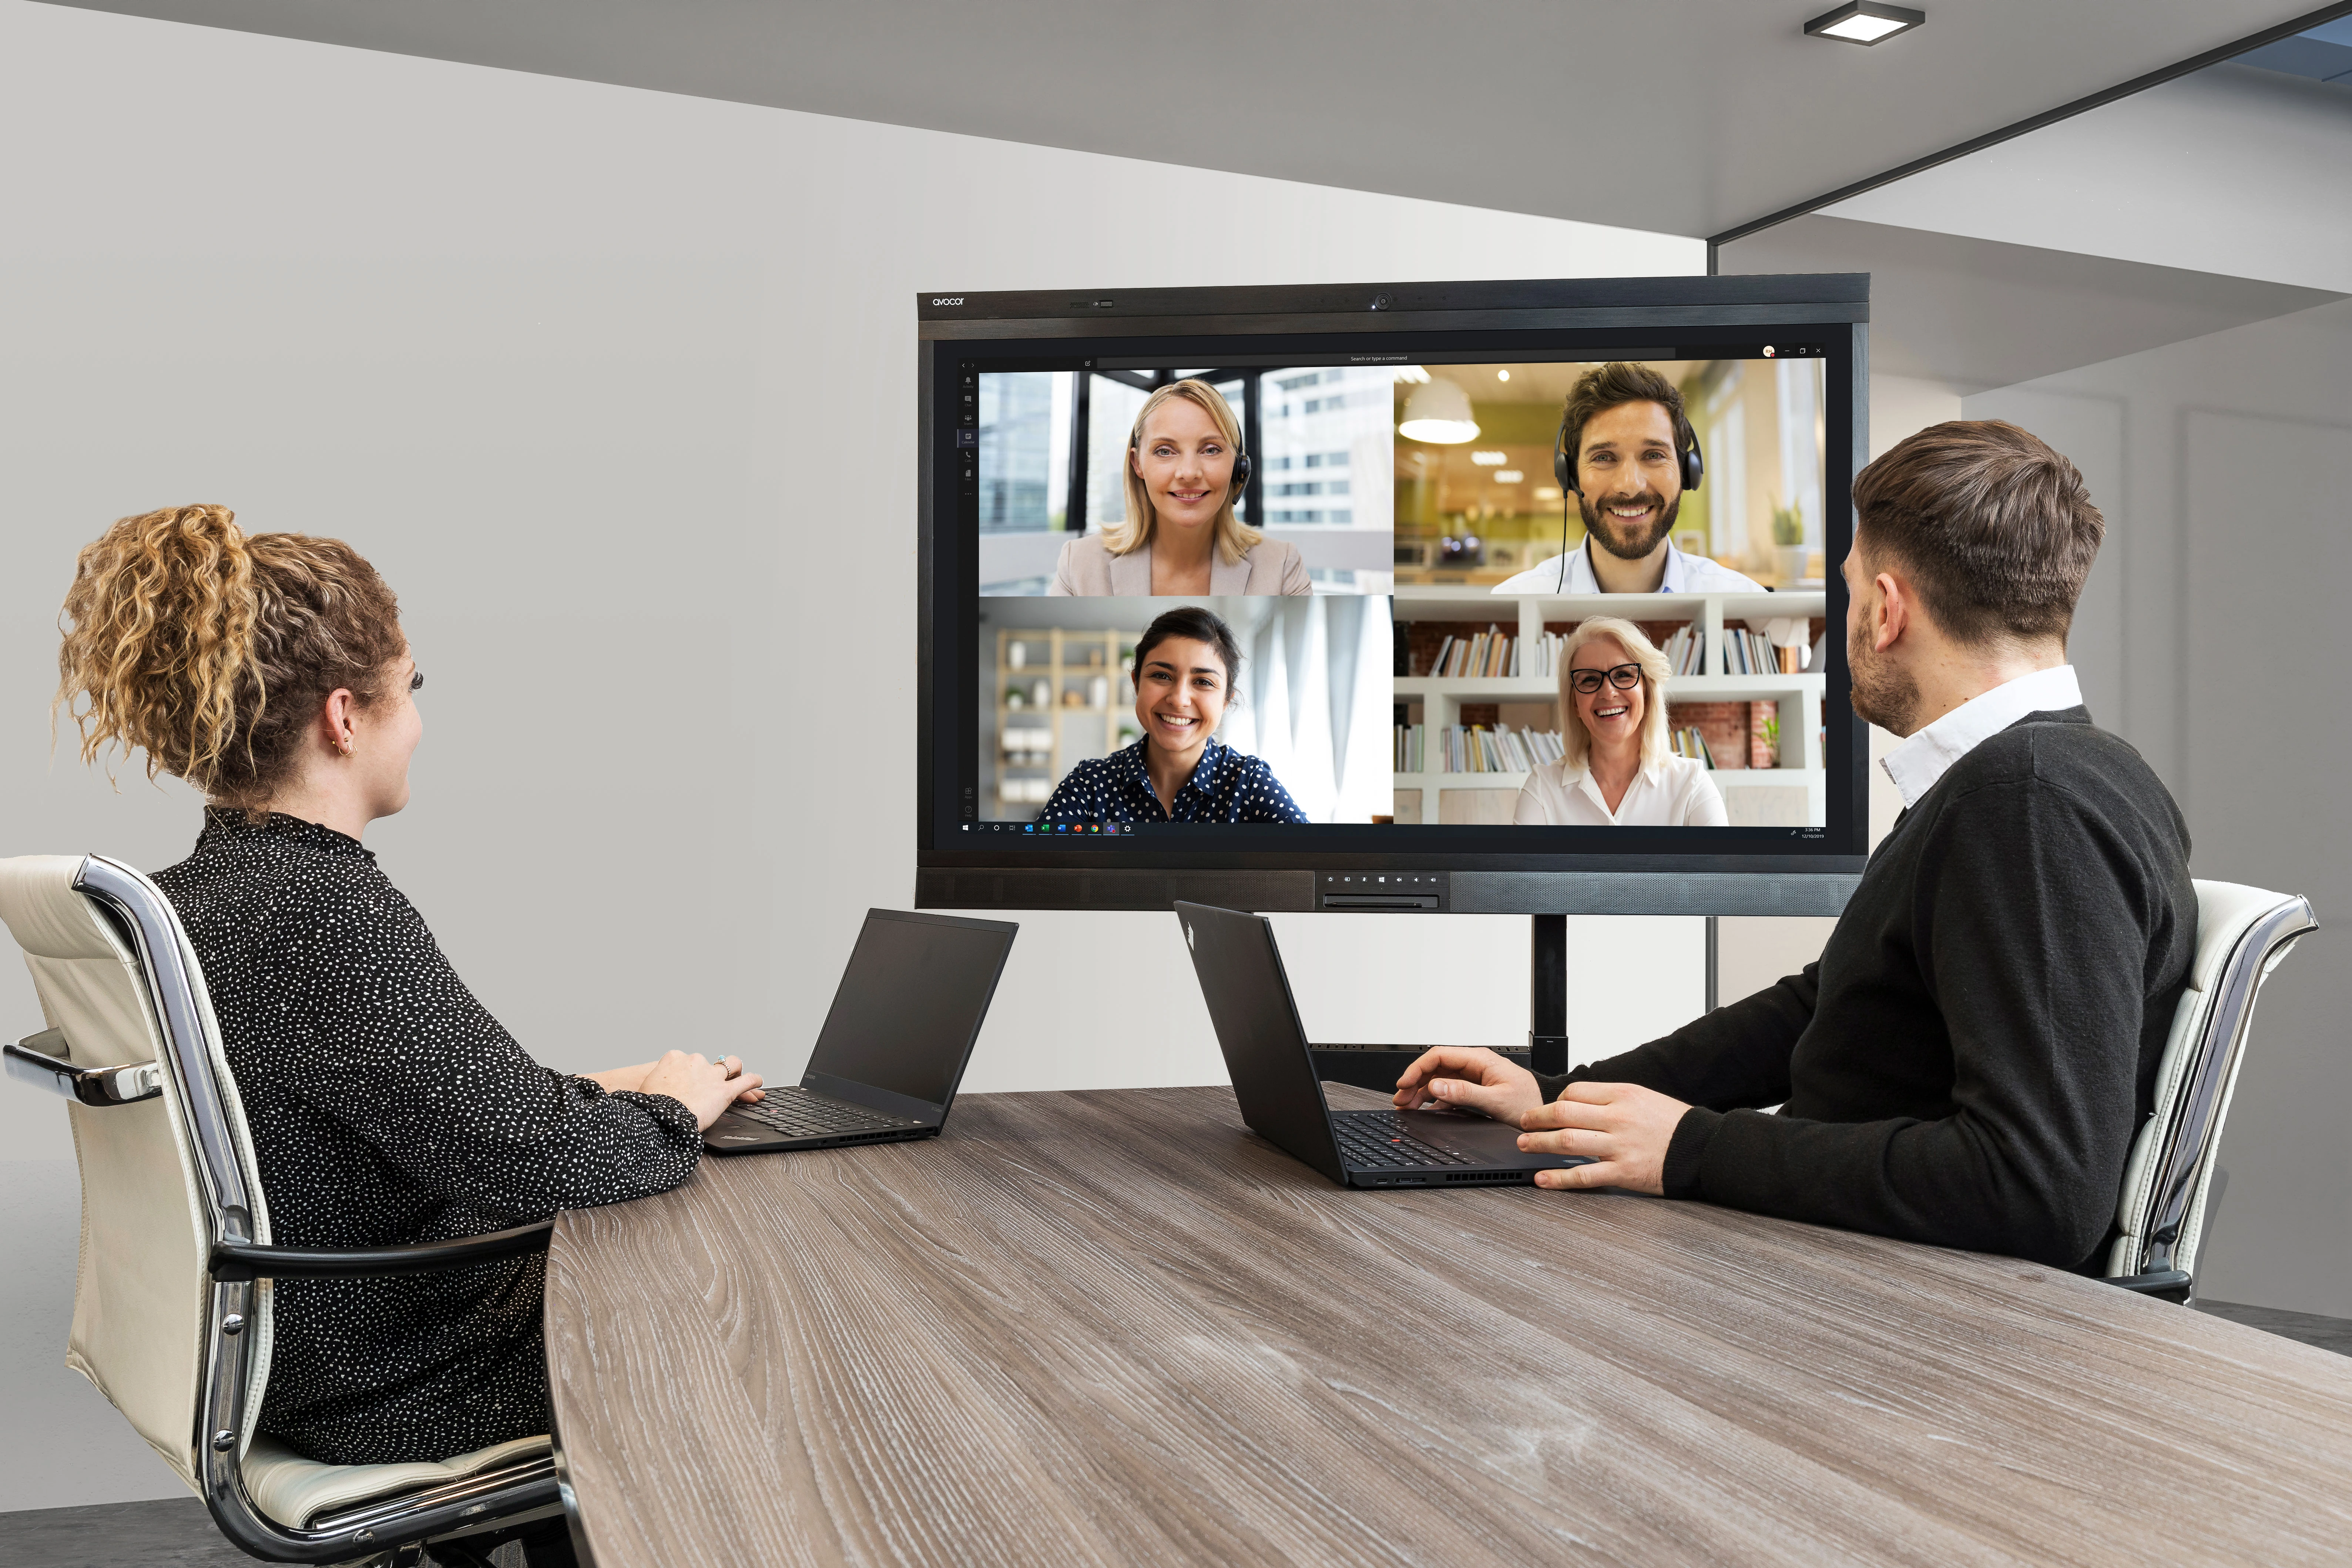 Hybrid meeting in progress. Two participants join the meeting from laptops in a meeting room, while four remote participants appear on a Avocor display